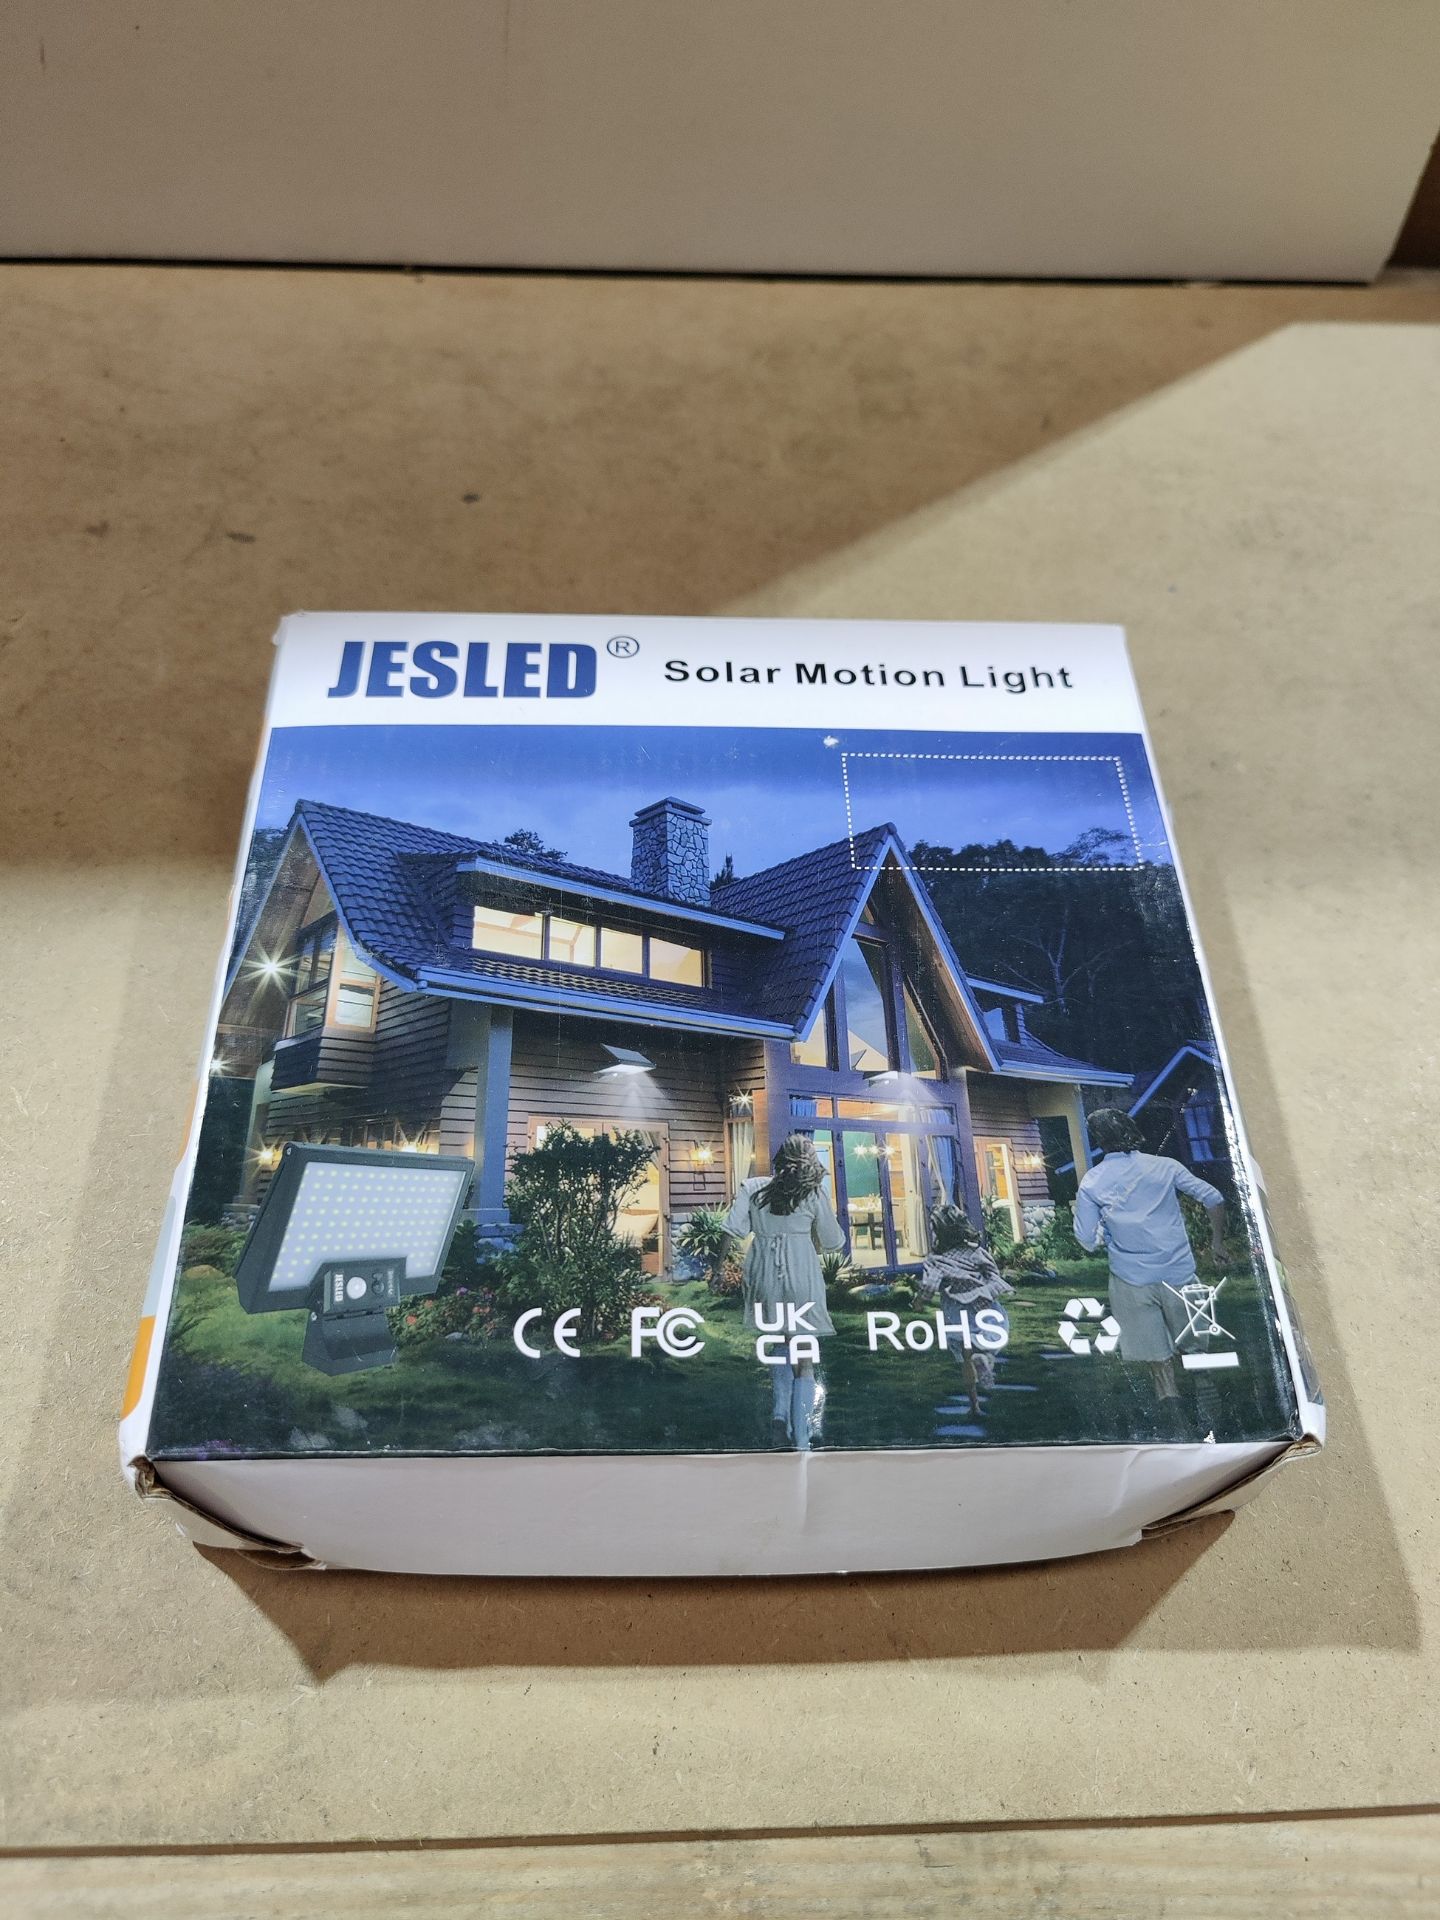 4 Items In This Lot. 4X JESLED SOLAR MOTION LIGHT TOTAL RRP £100